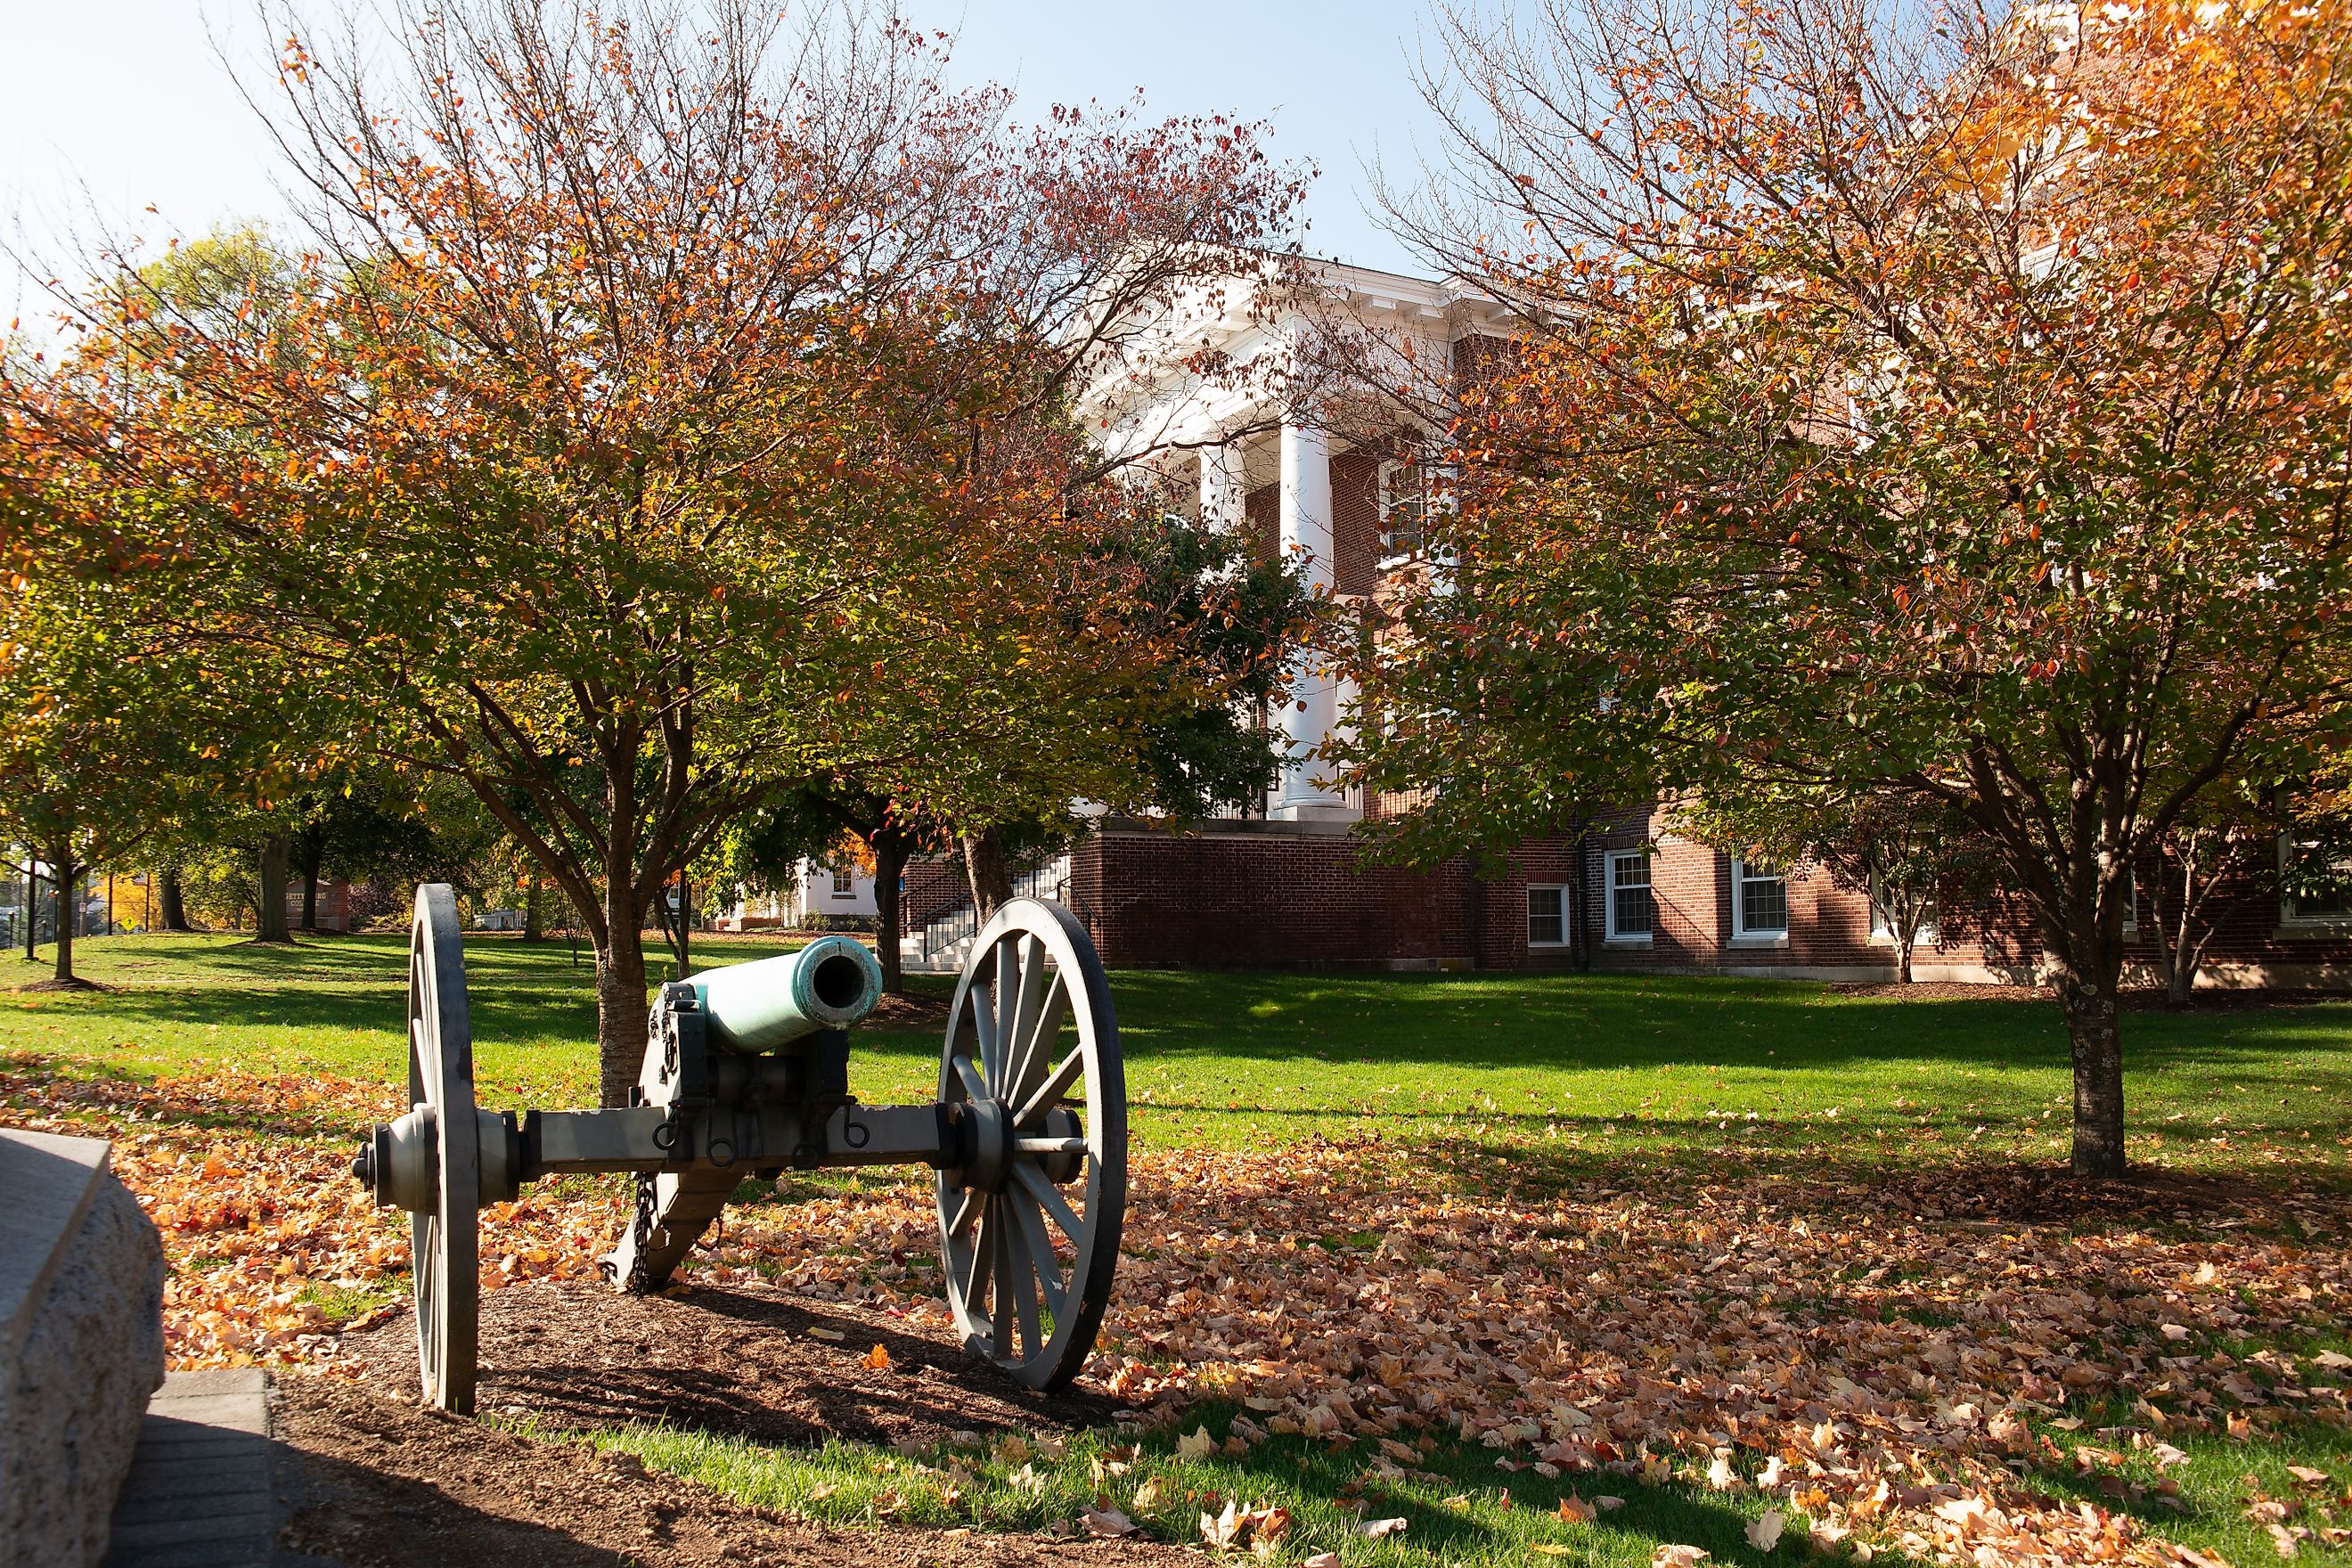 A civil war monument at the Gettysburg College. Image credits: George Sheldon via Shutterstock